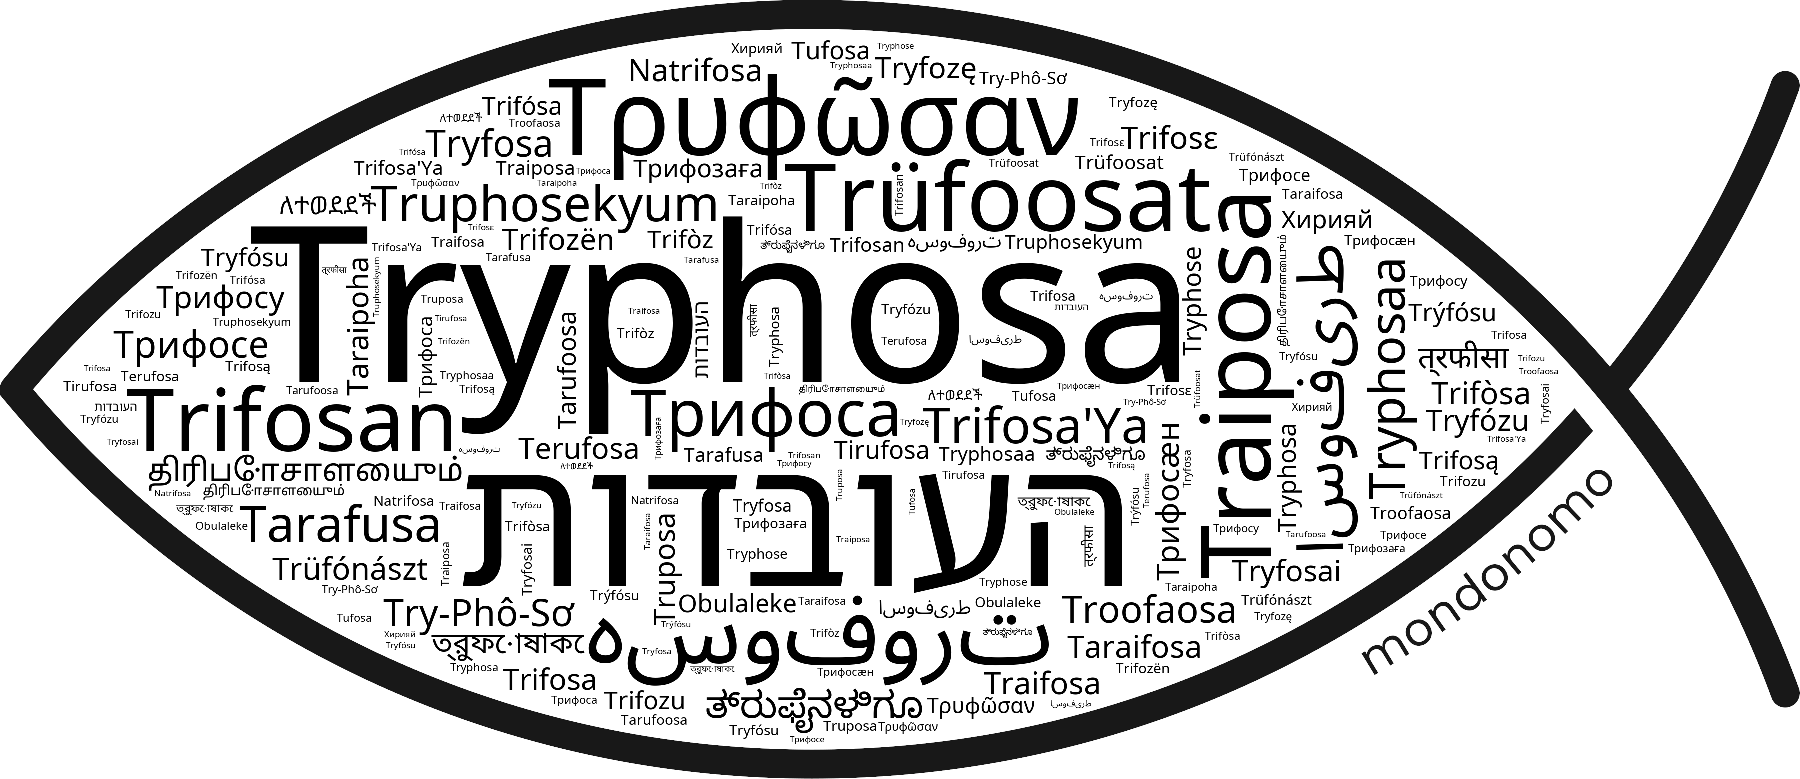 Name Tryphosa in the world's Bibles